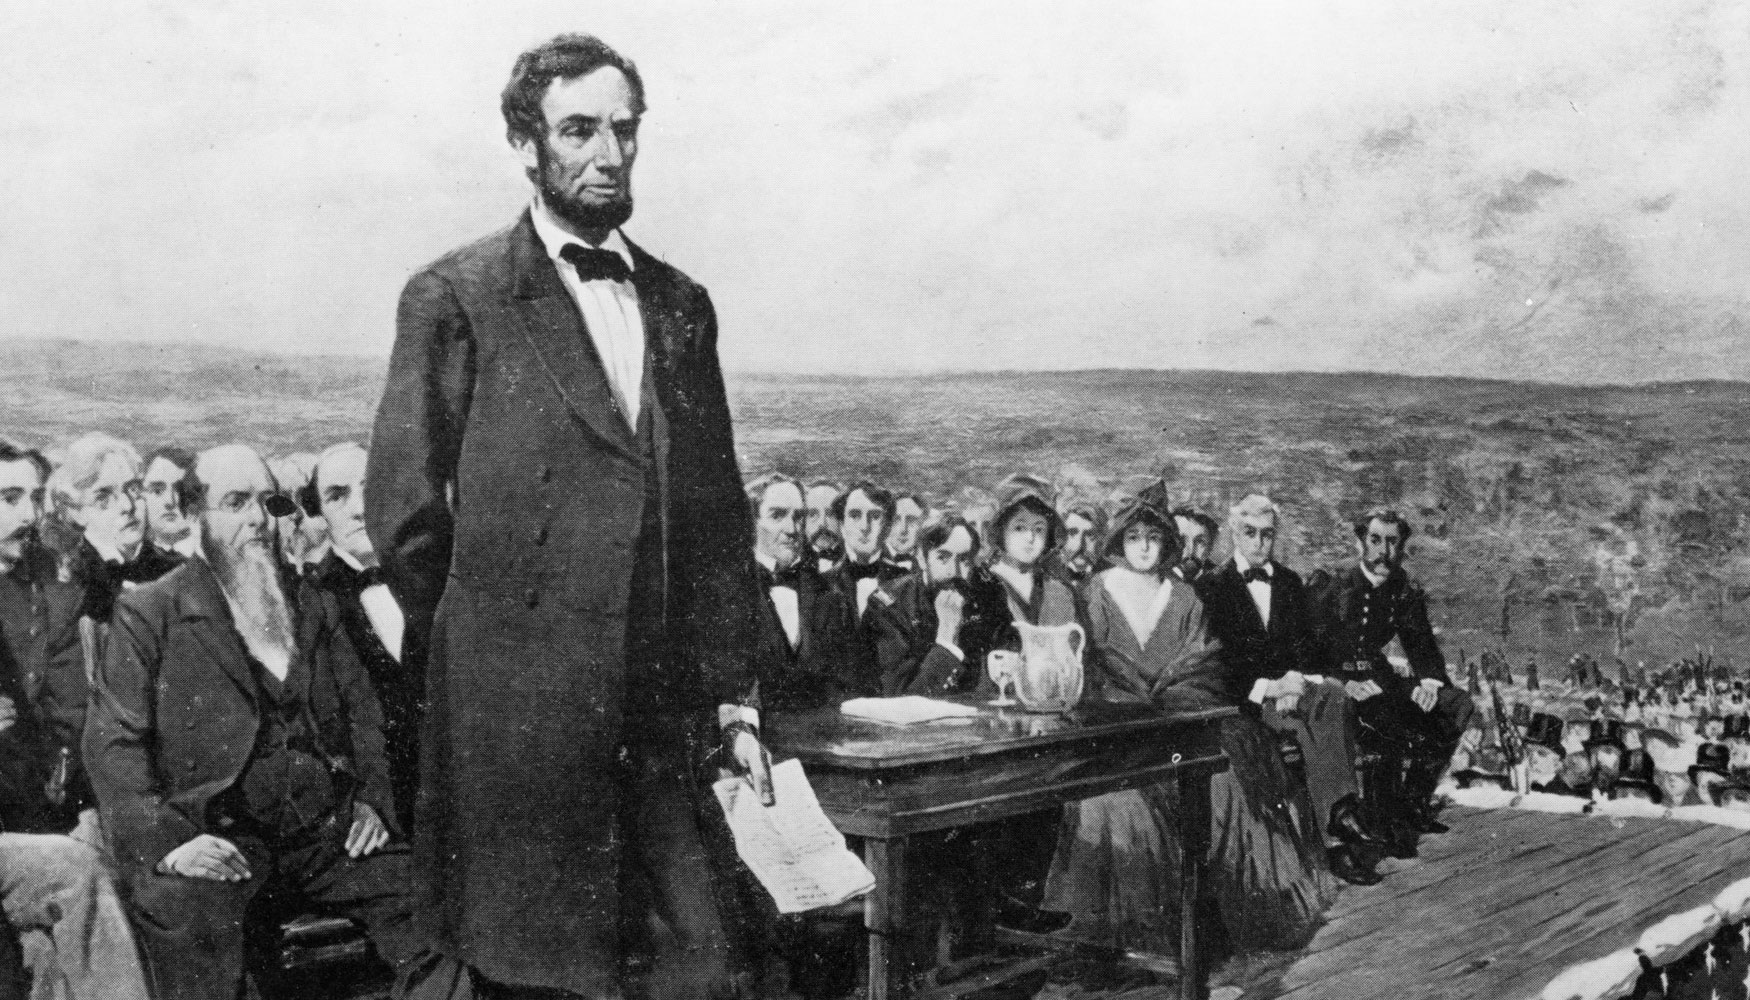 No American Has Got Perfect Score on This Quiz Without Cheating The Gettysburg Address